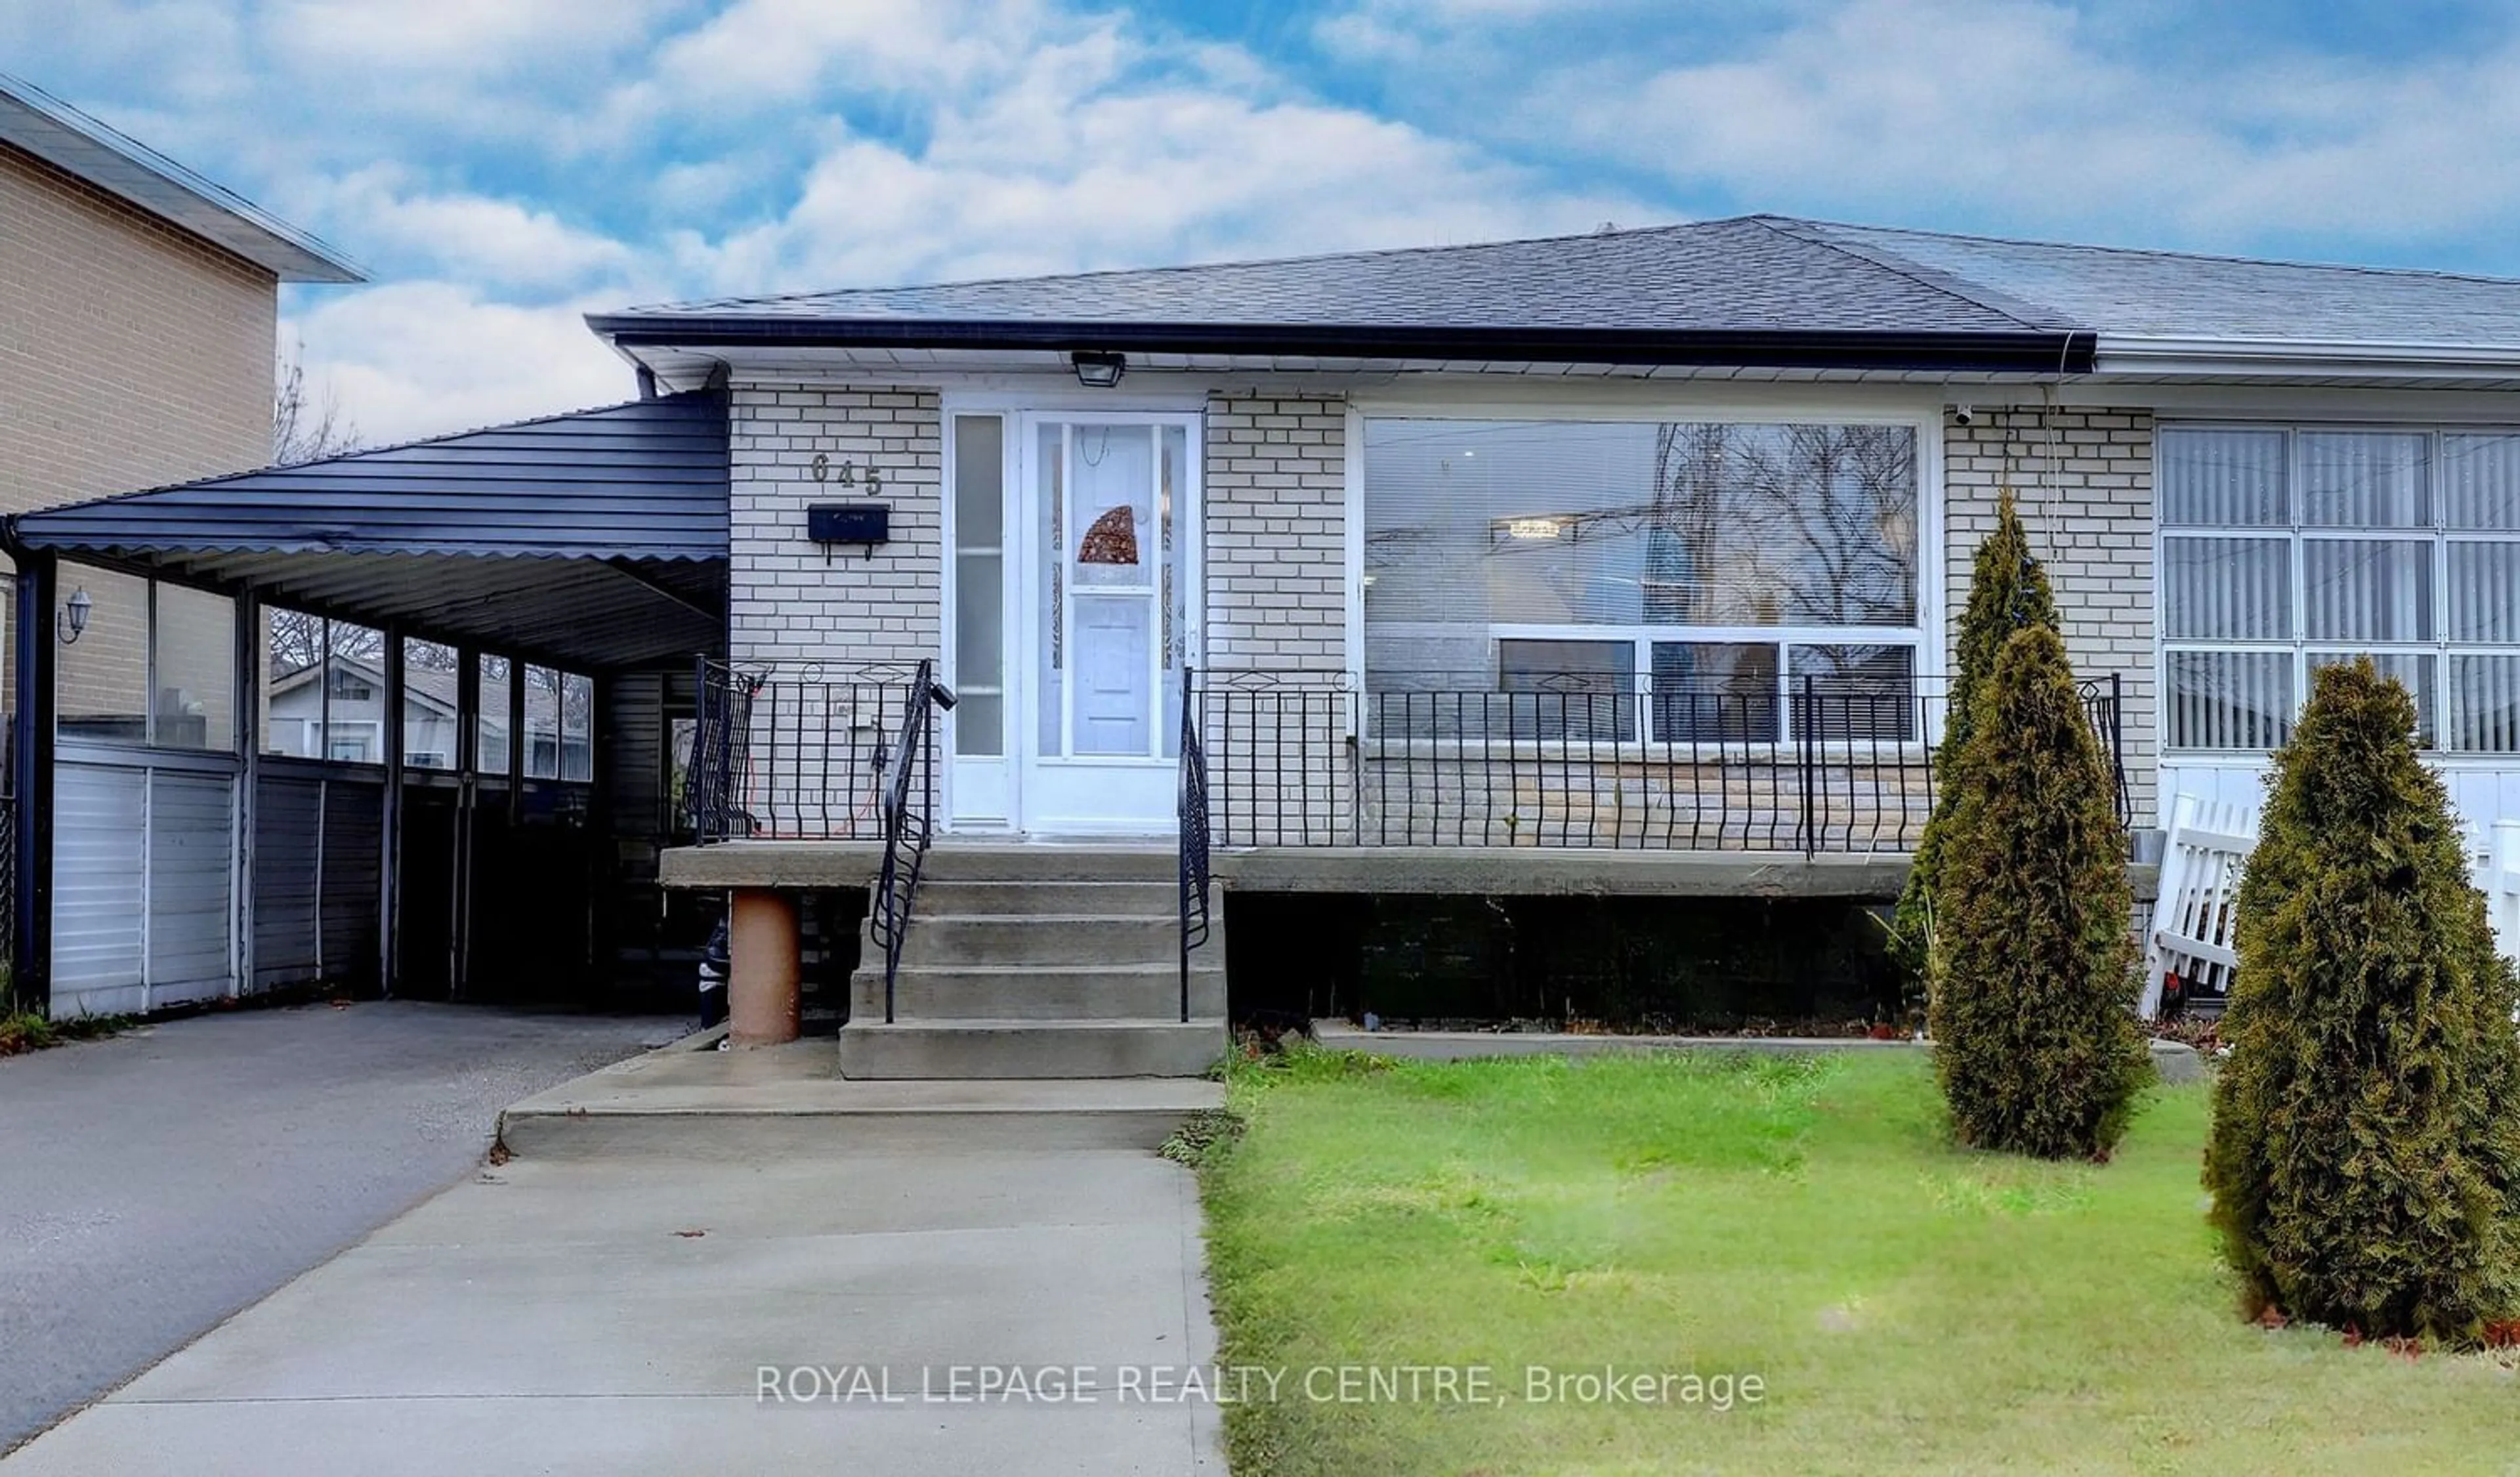 Frontside or backside of a home for 645 Abana Rd, Mississauga Ontario L5A 1H6